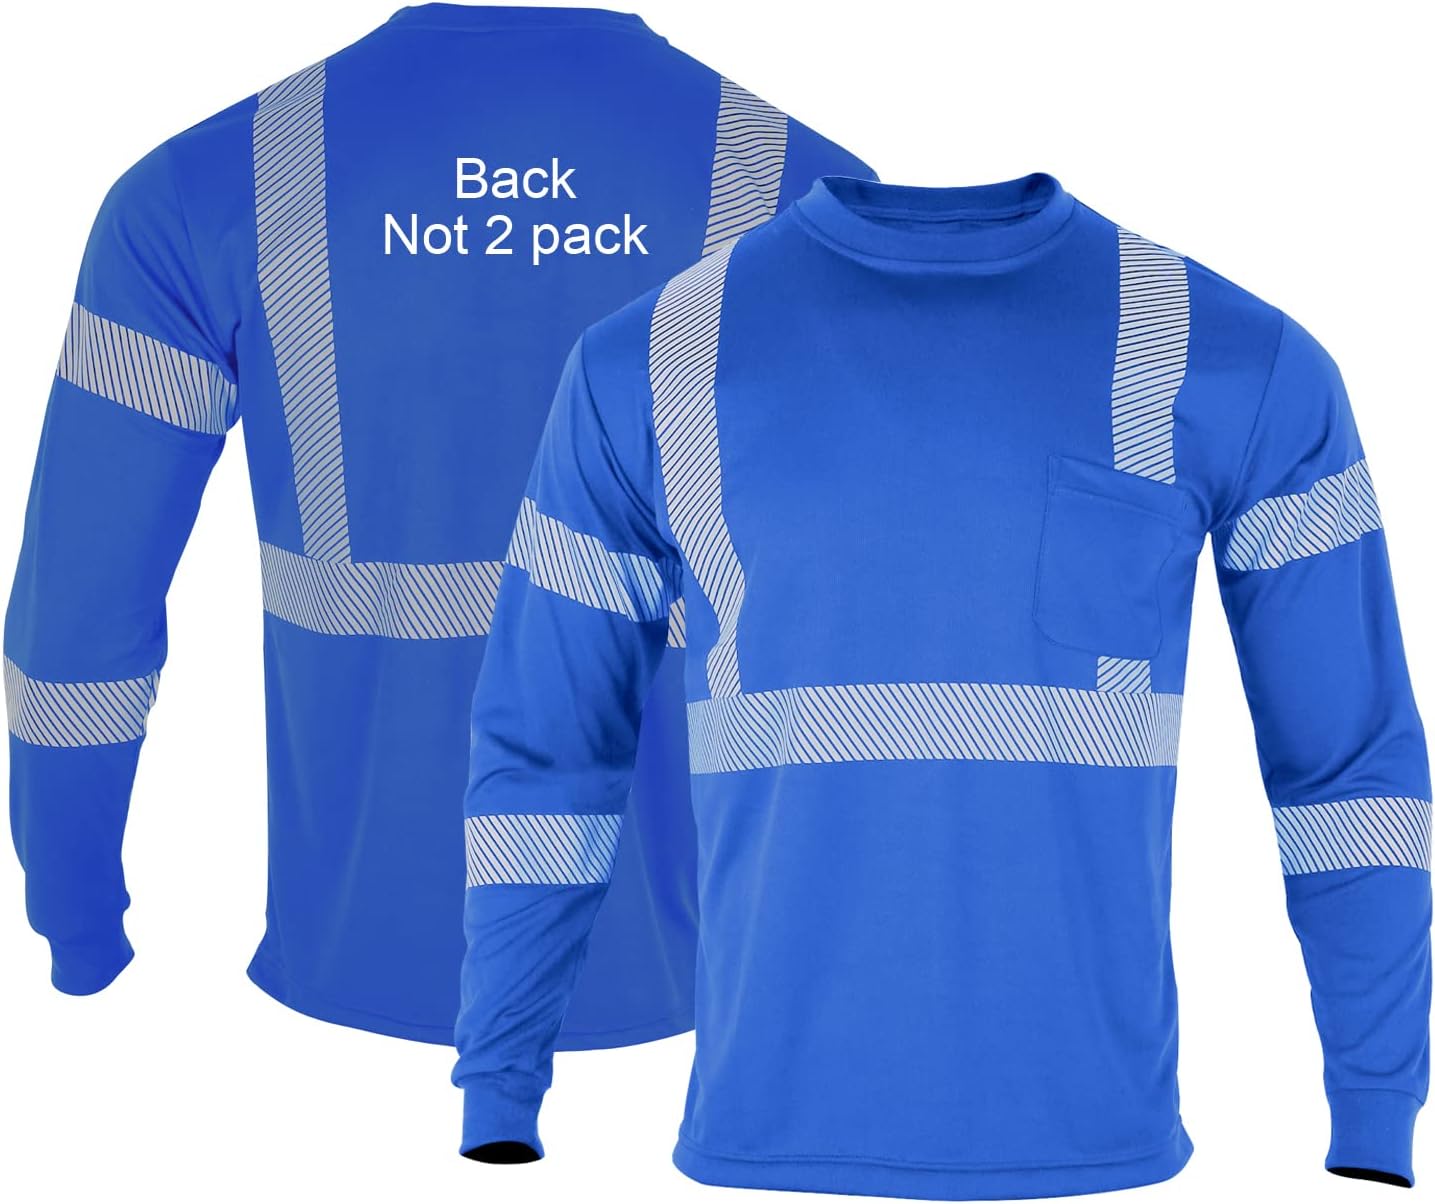 FONIRRA Safety Reflective High Visibility T Shirt for Men with Long Sleeve ANSI Class 2(Blue,S)